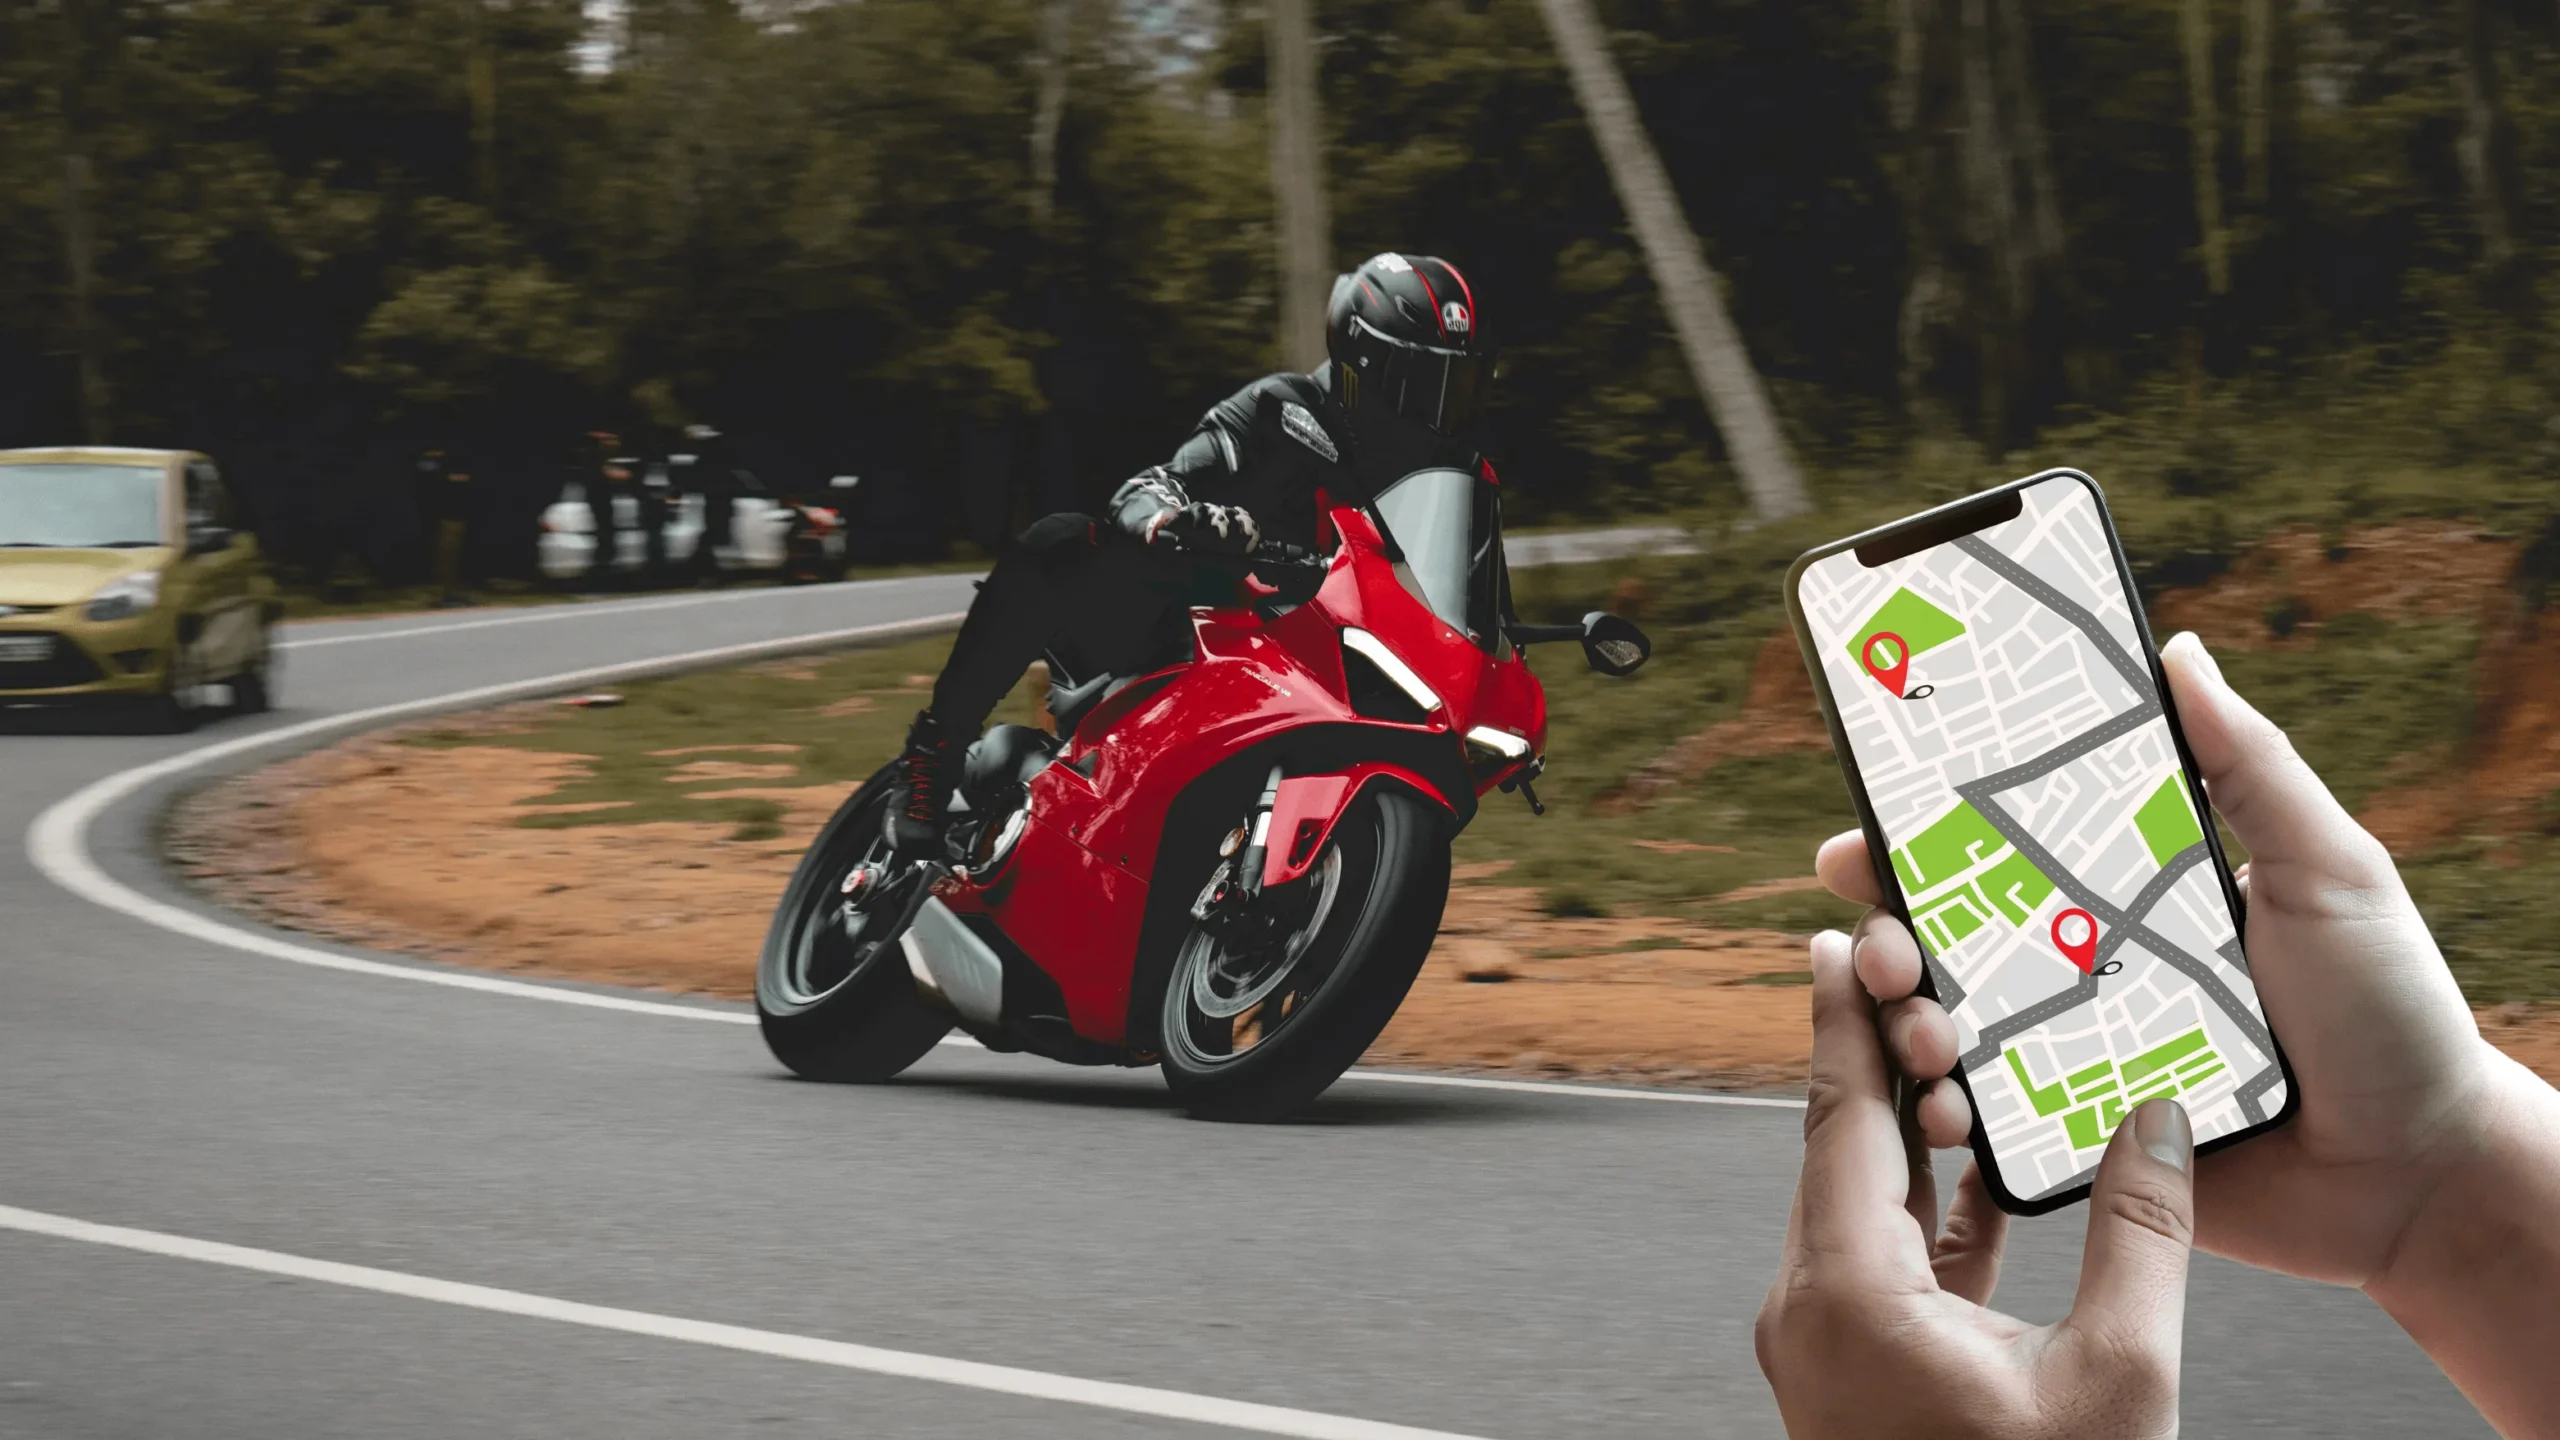 GPS Trackers For Motorcycles and Cars